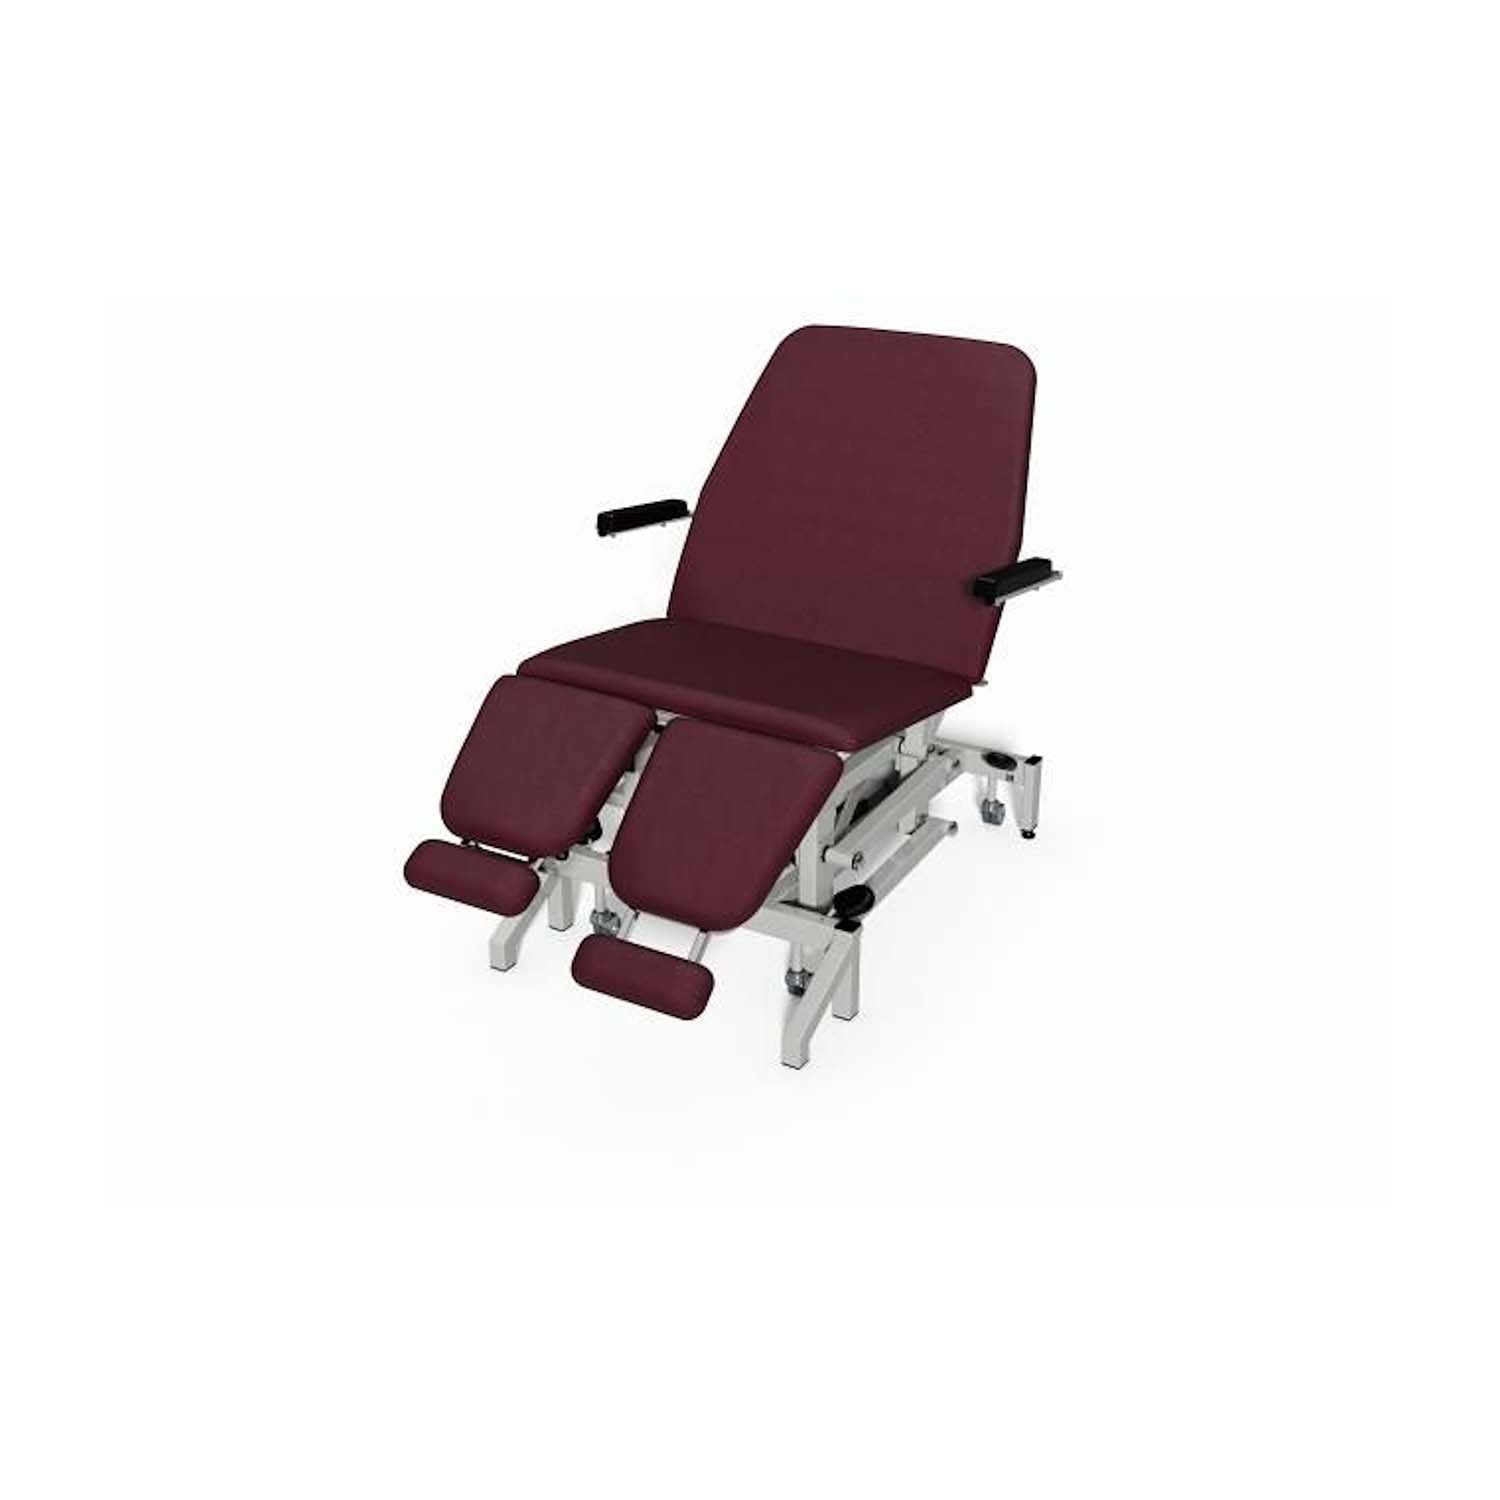 Plinth 2000 Model 50CD Bariatric Podiatry Chair | Mulled Wine